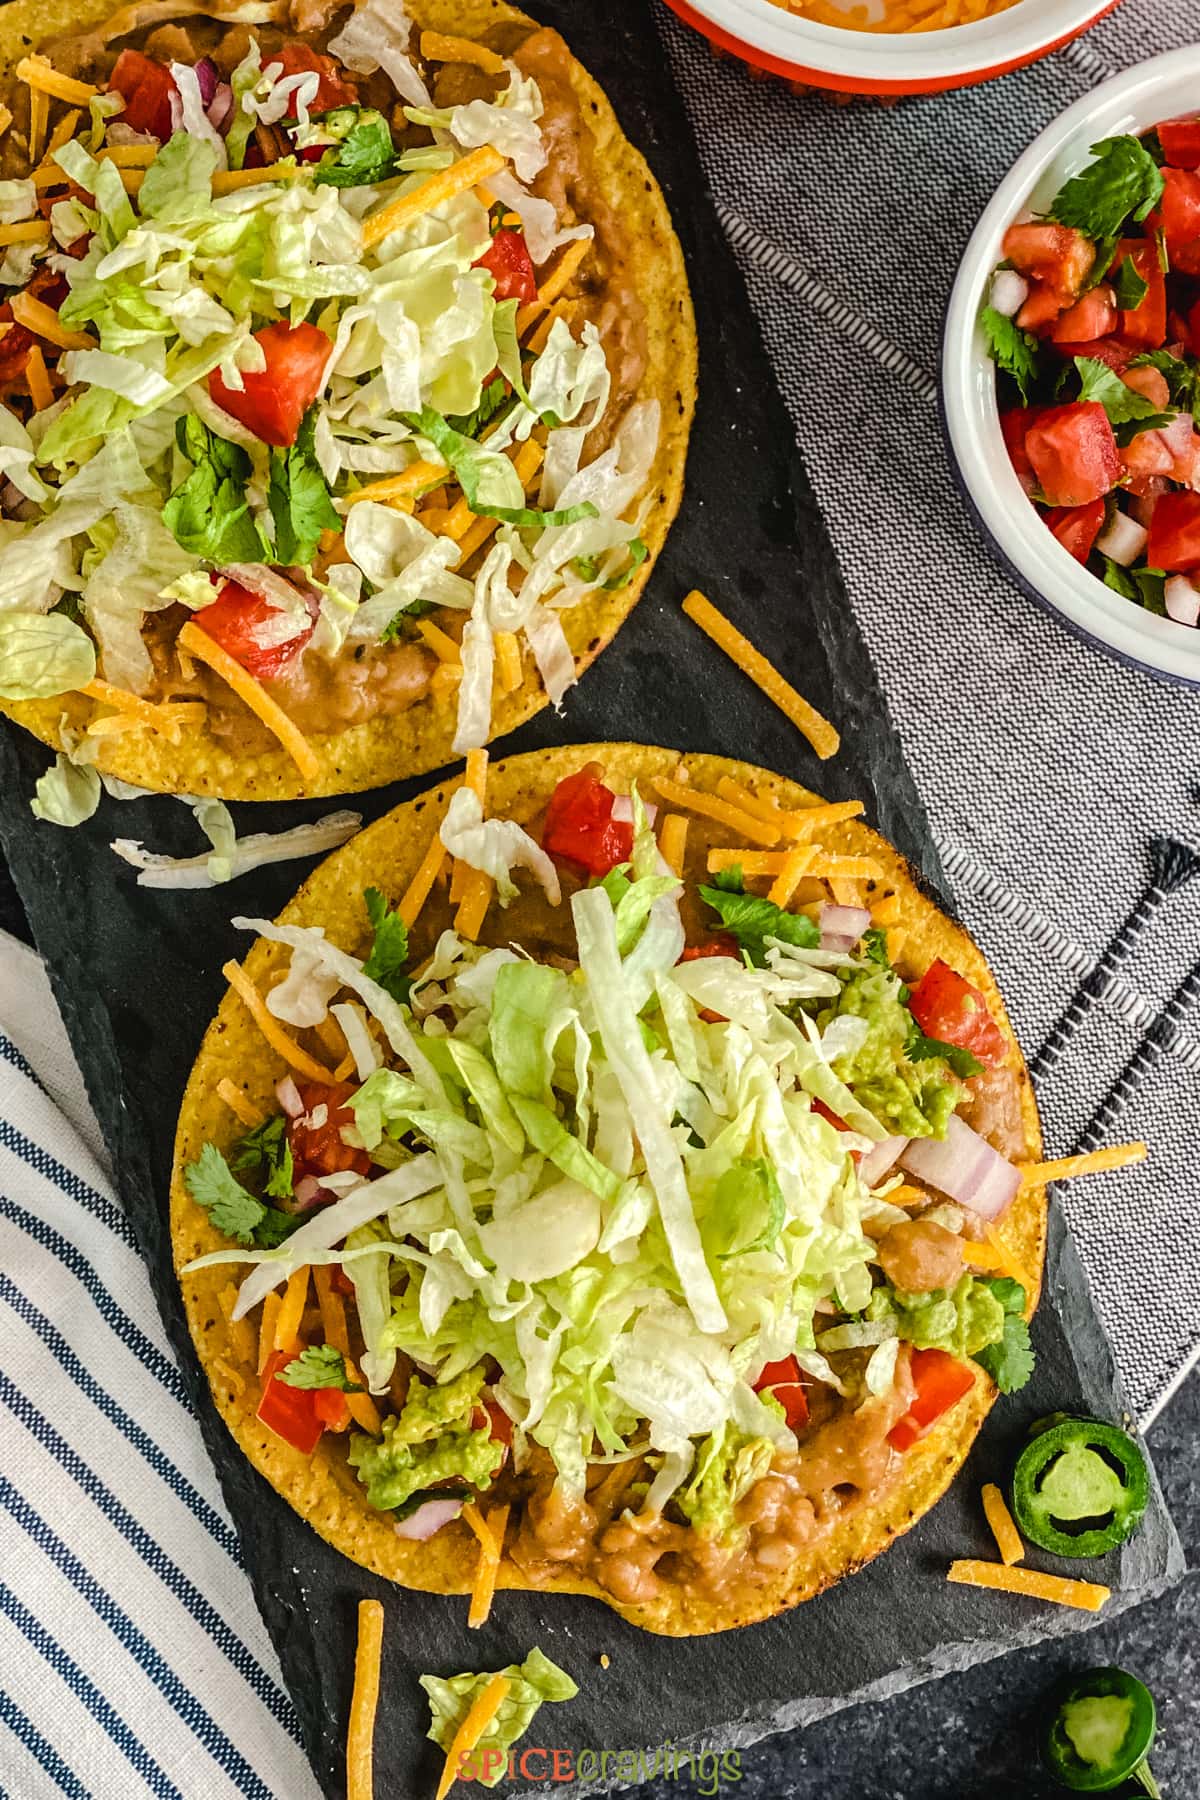 Crispy Tortillas topped with lettuce, beans, tomato and cheese